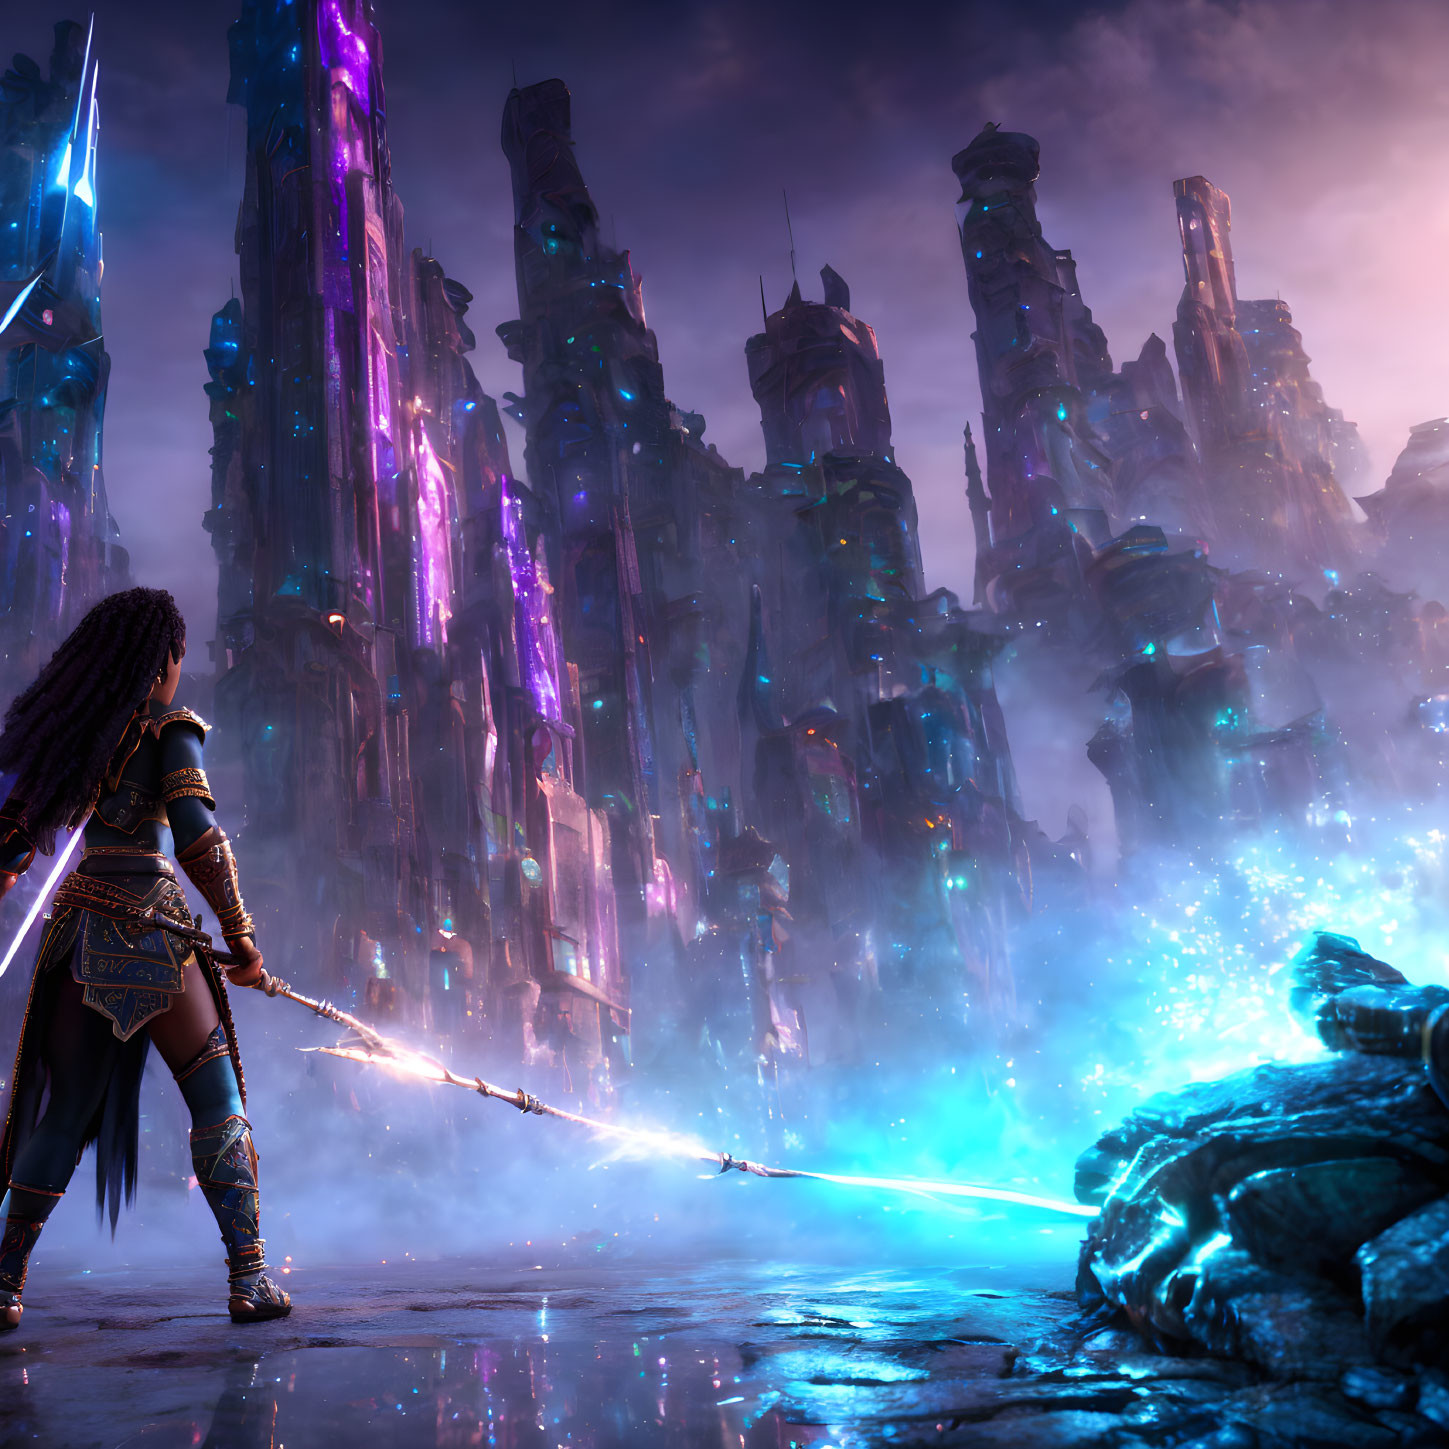 Warrior with glowing spear confronts mystical city with purple crystals.